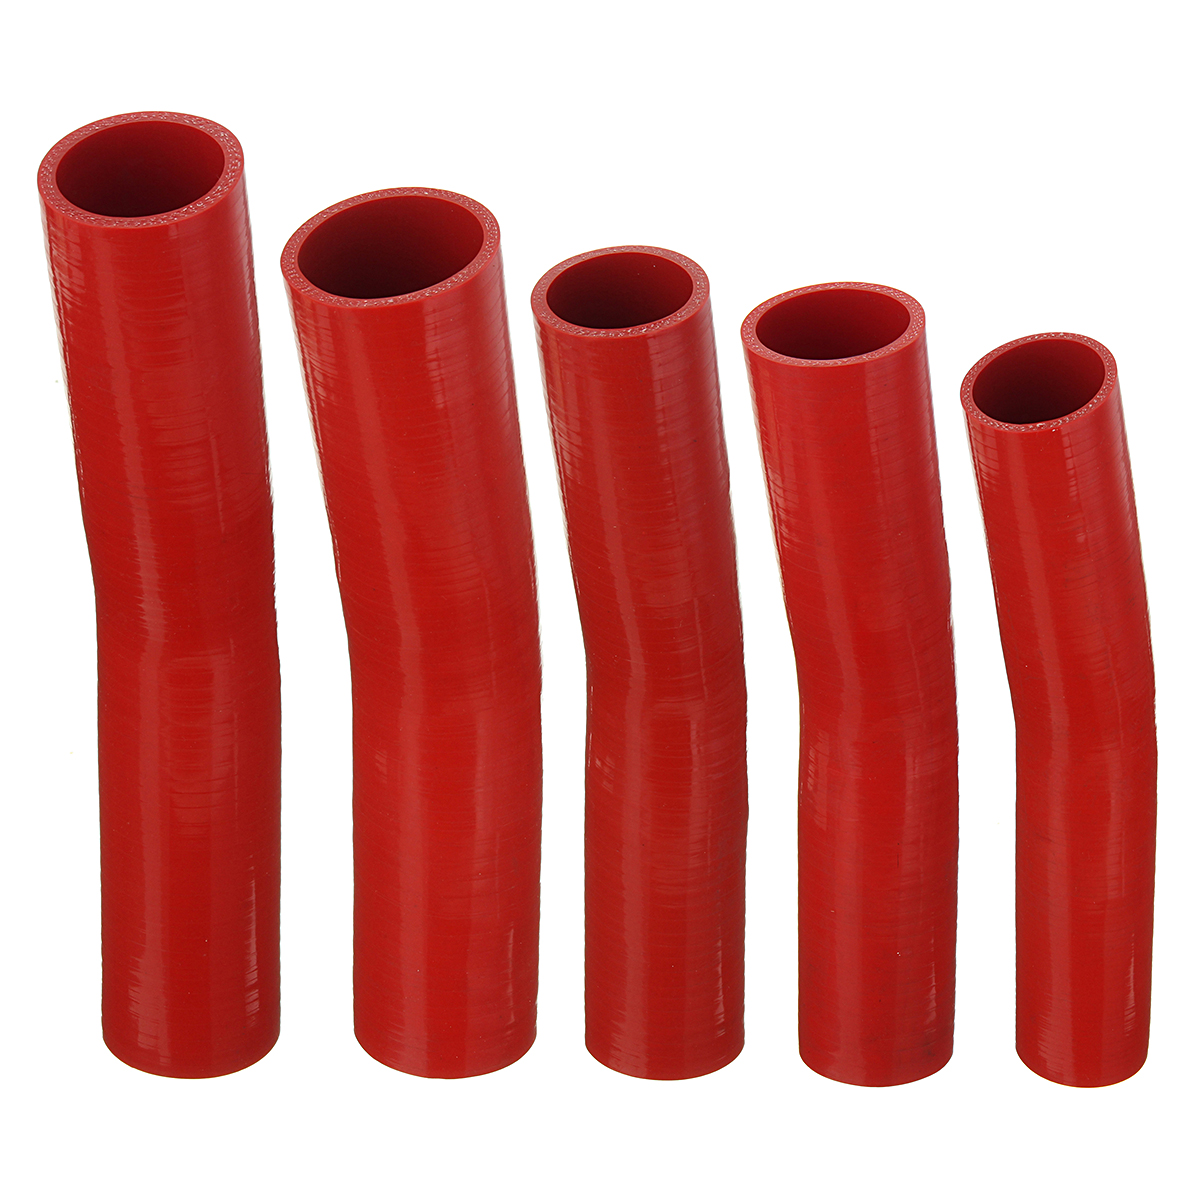 Auto-Silicone-Hoses-Rubber-15-Degree-Elbow-Bend-Hose-Air-Water-Coolant-Joiner-Pipe-Tube-1197015-1